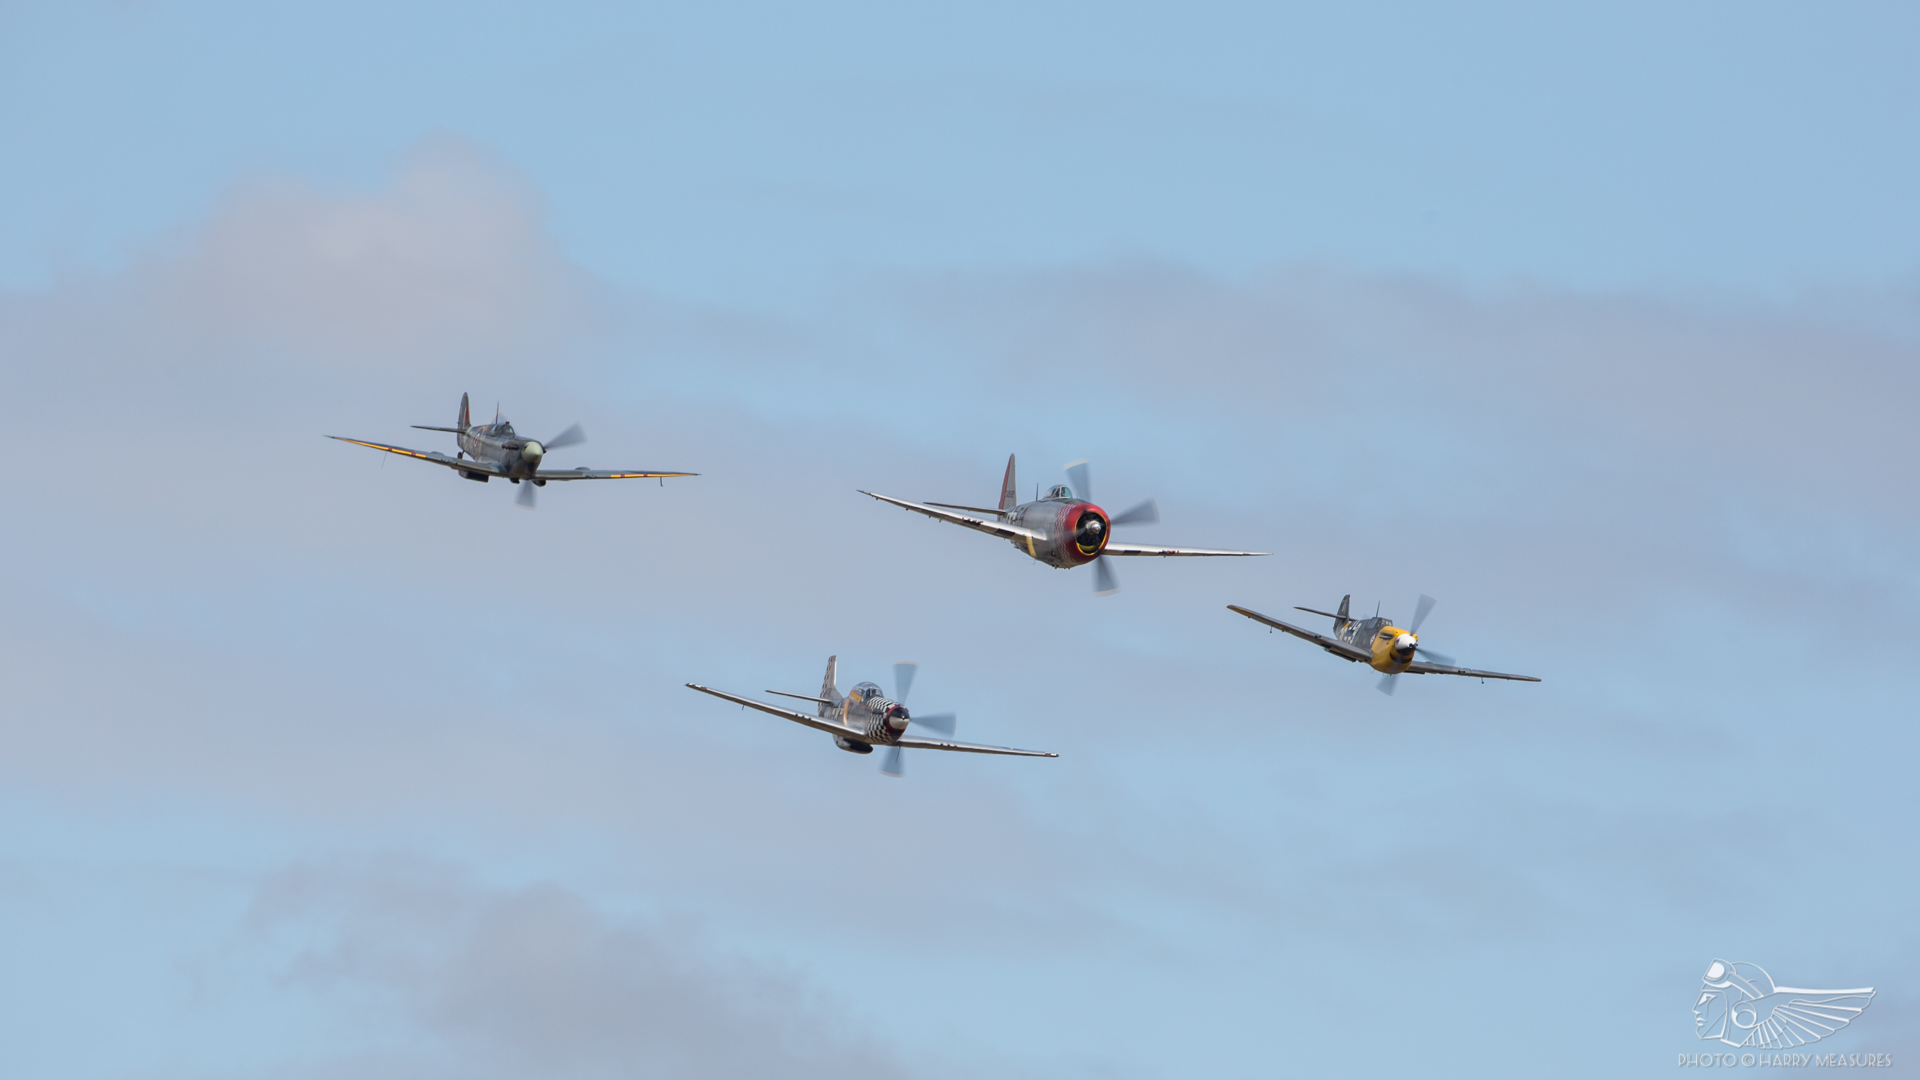 Flying Legends showcases multiple debuts - The Vintage Aviation Echo